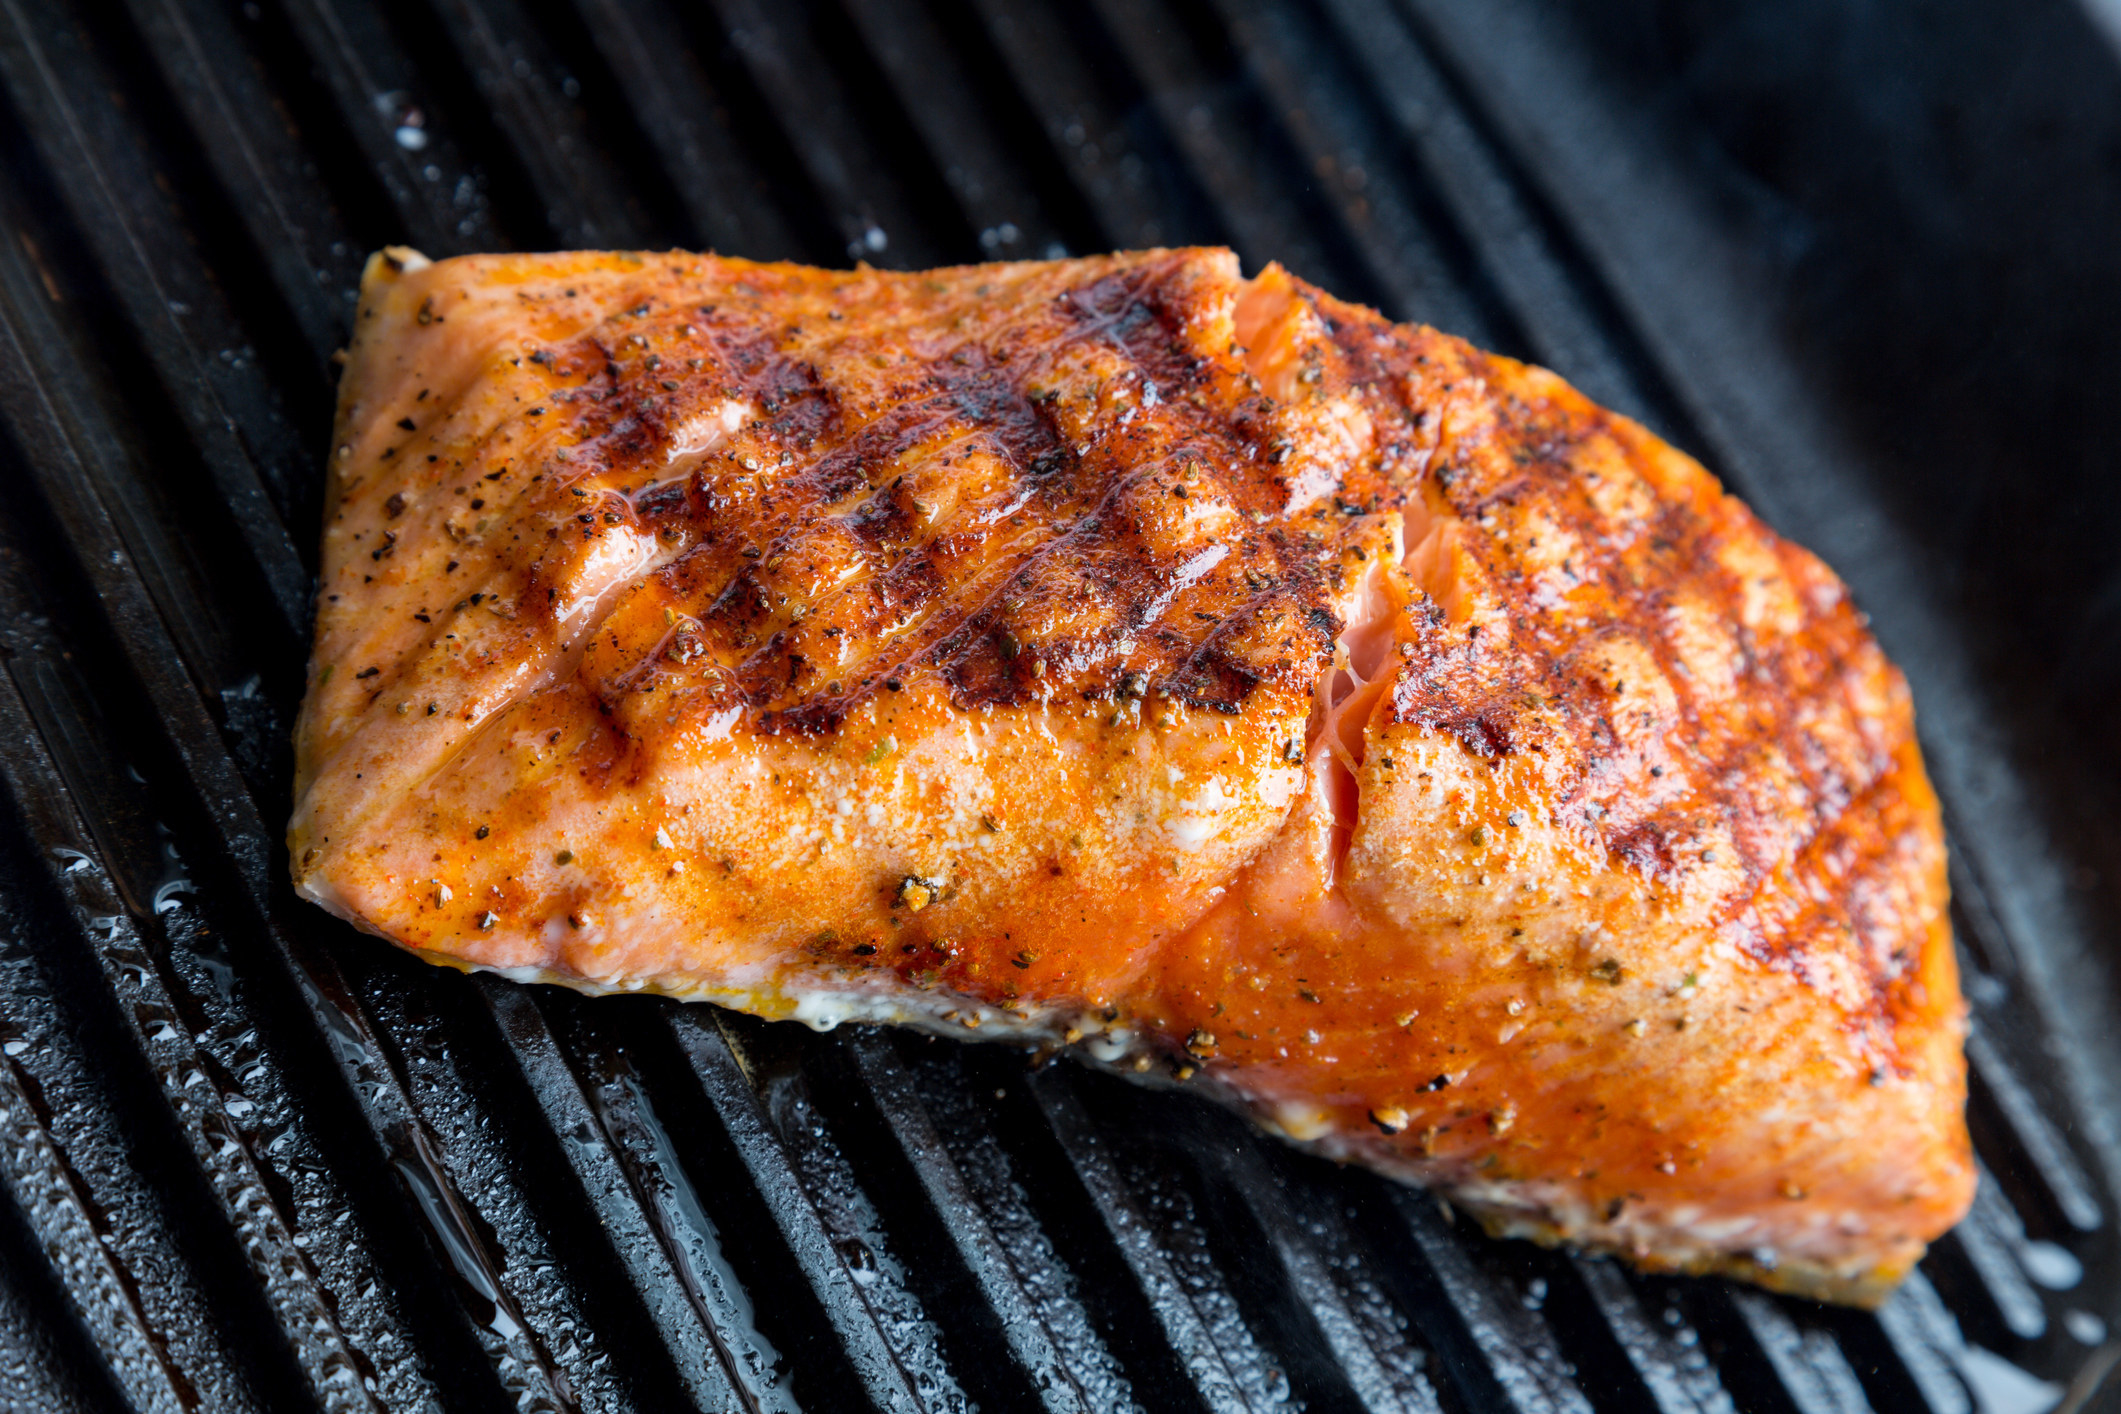 A salmon fillet on the grill.